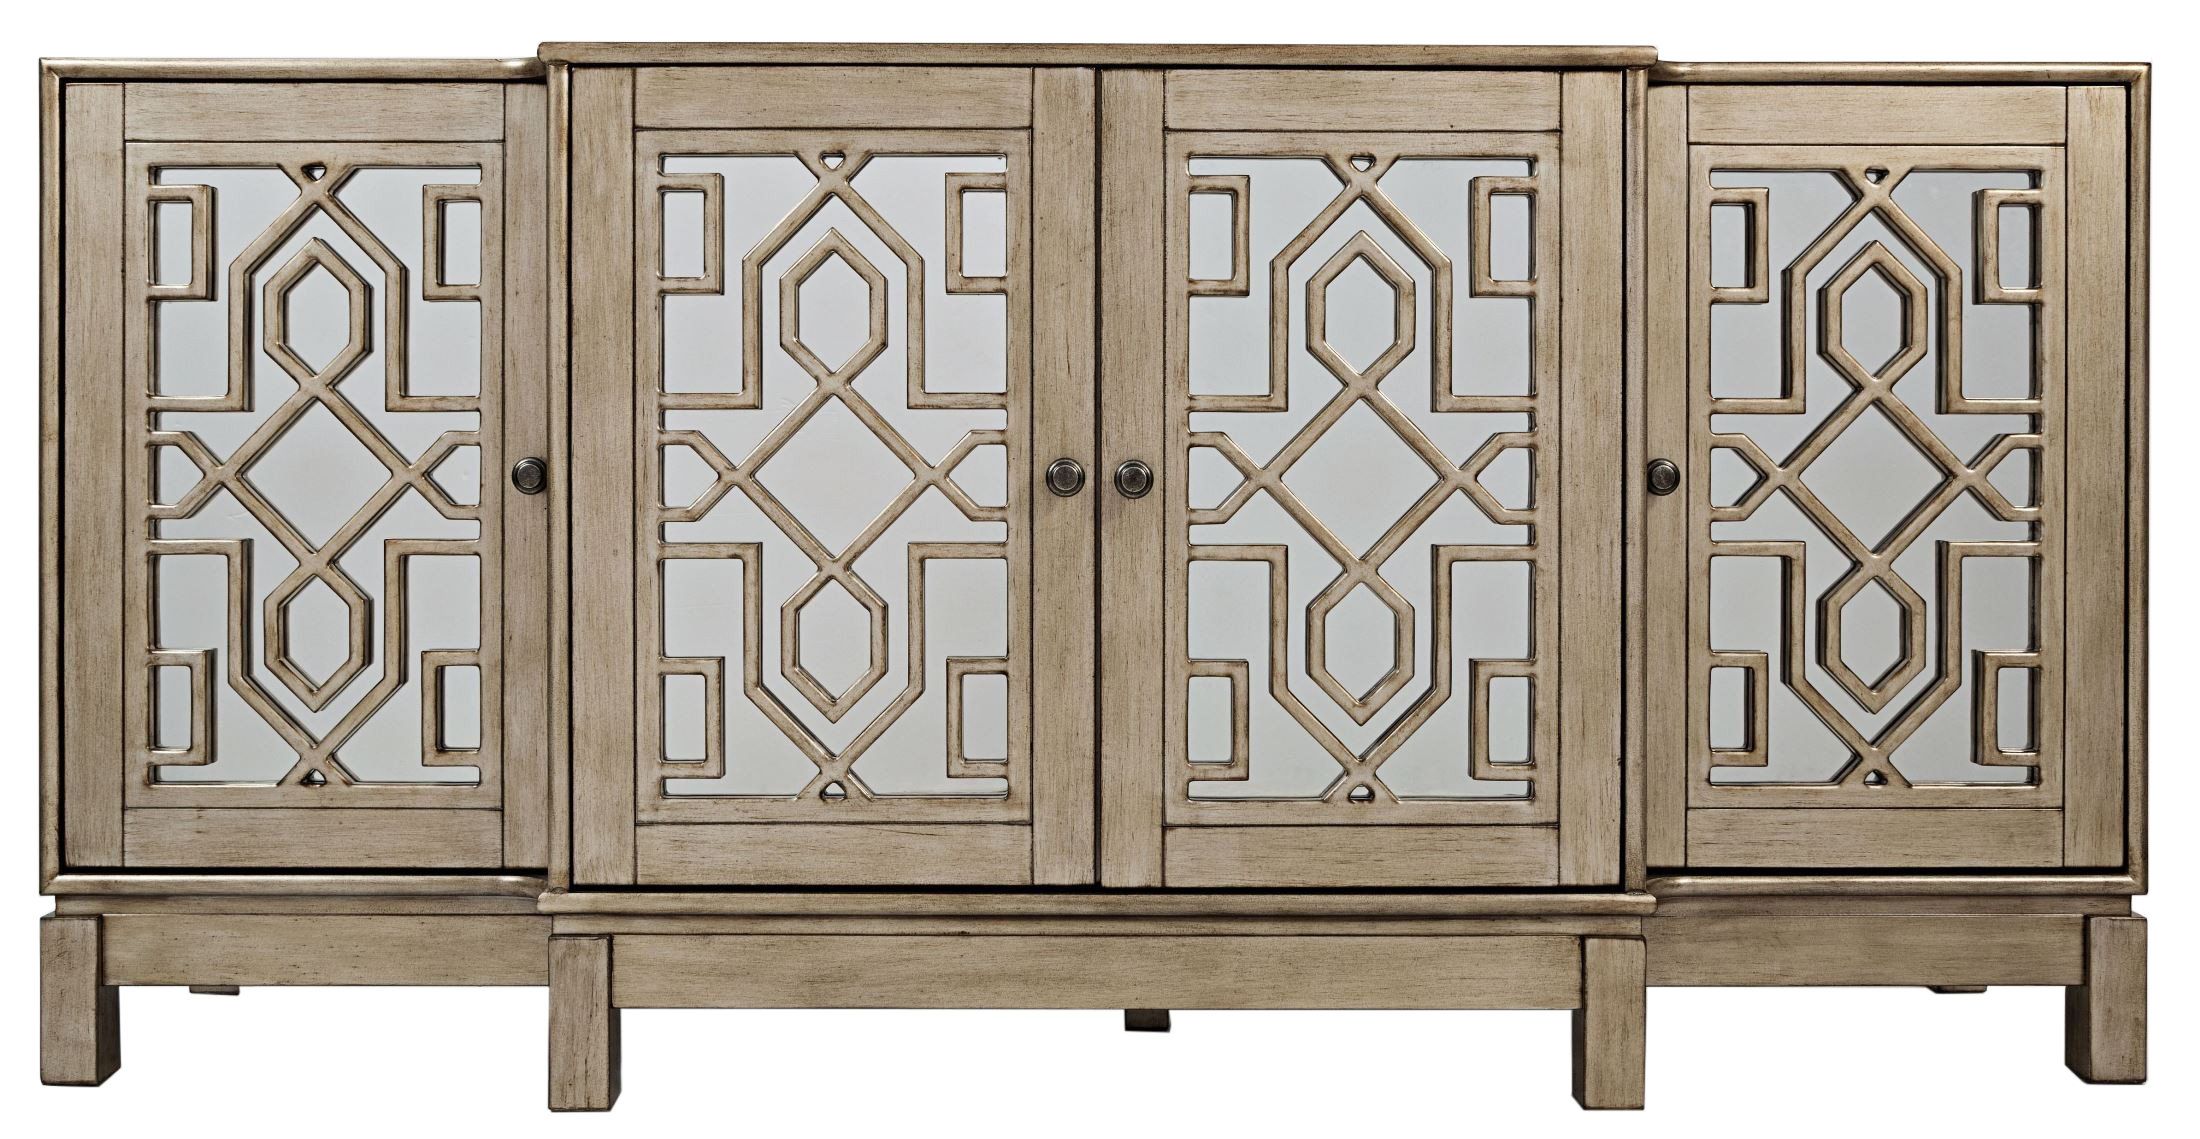 Assembled Sideboards & Buffets | Joss & Main With Regard To Most Up To Date Chicoree Charlena Sideboards (View 14 of 20)